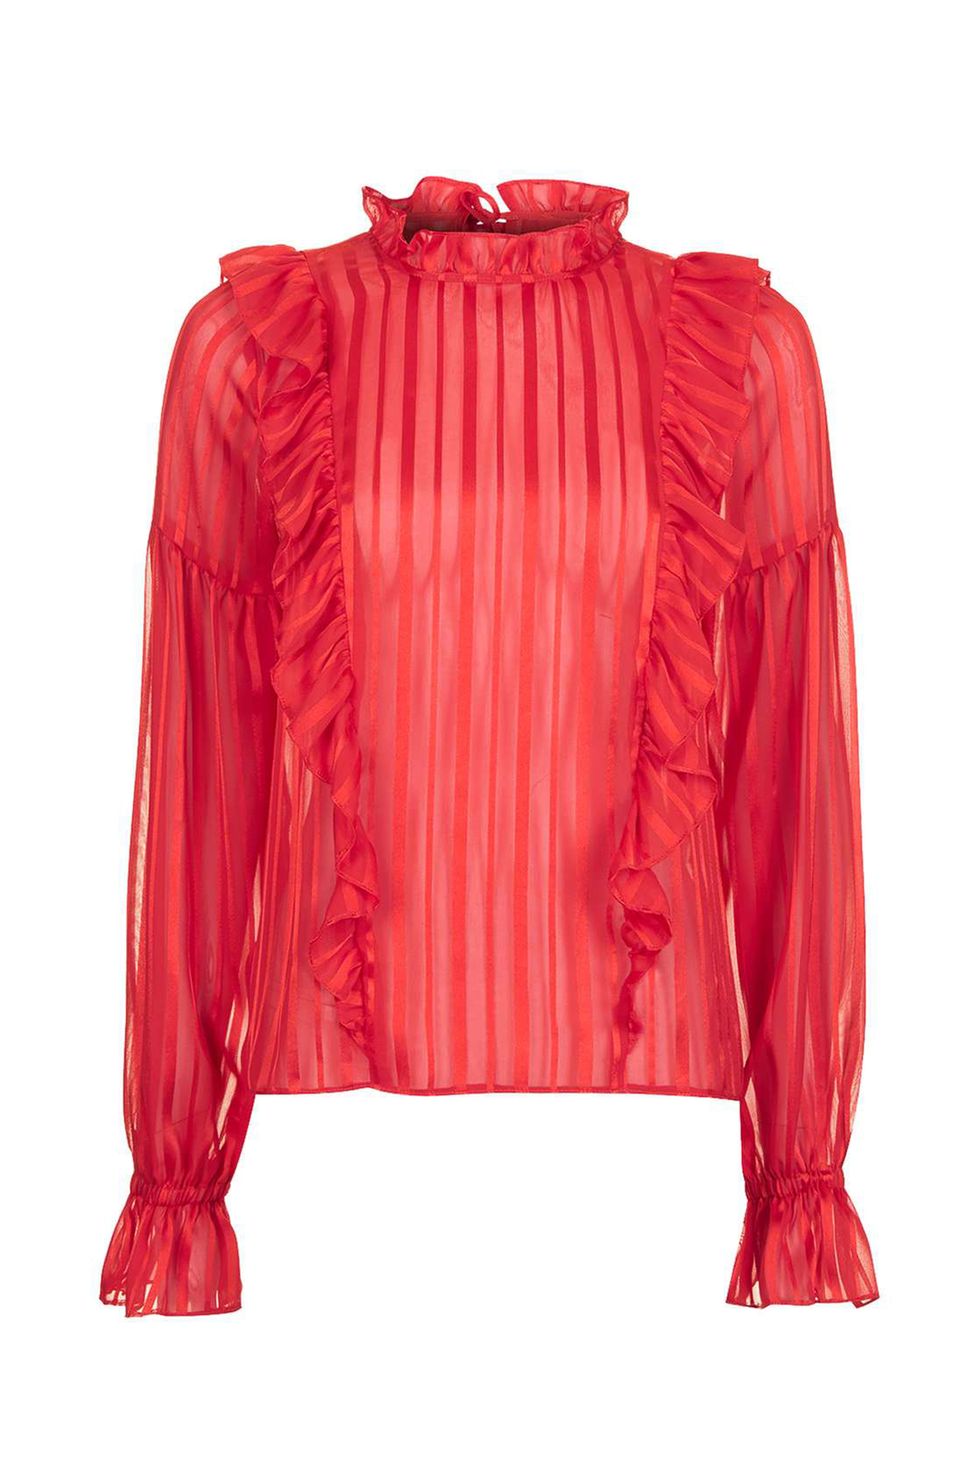 A Romantic Blouse Should Be Your Winter Wardrobe BFF